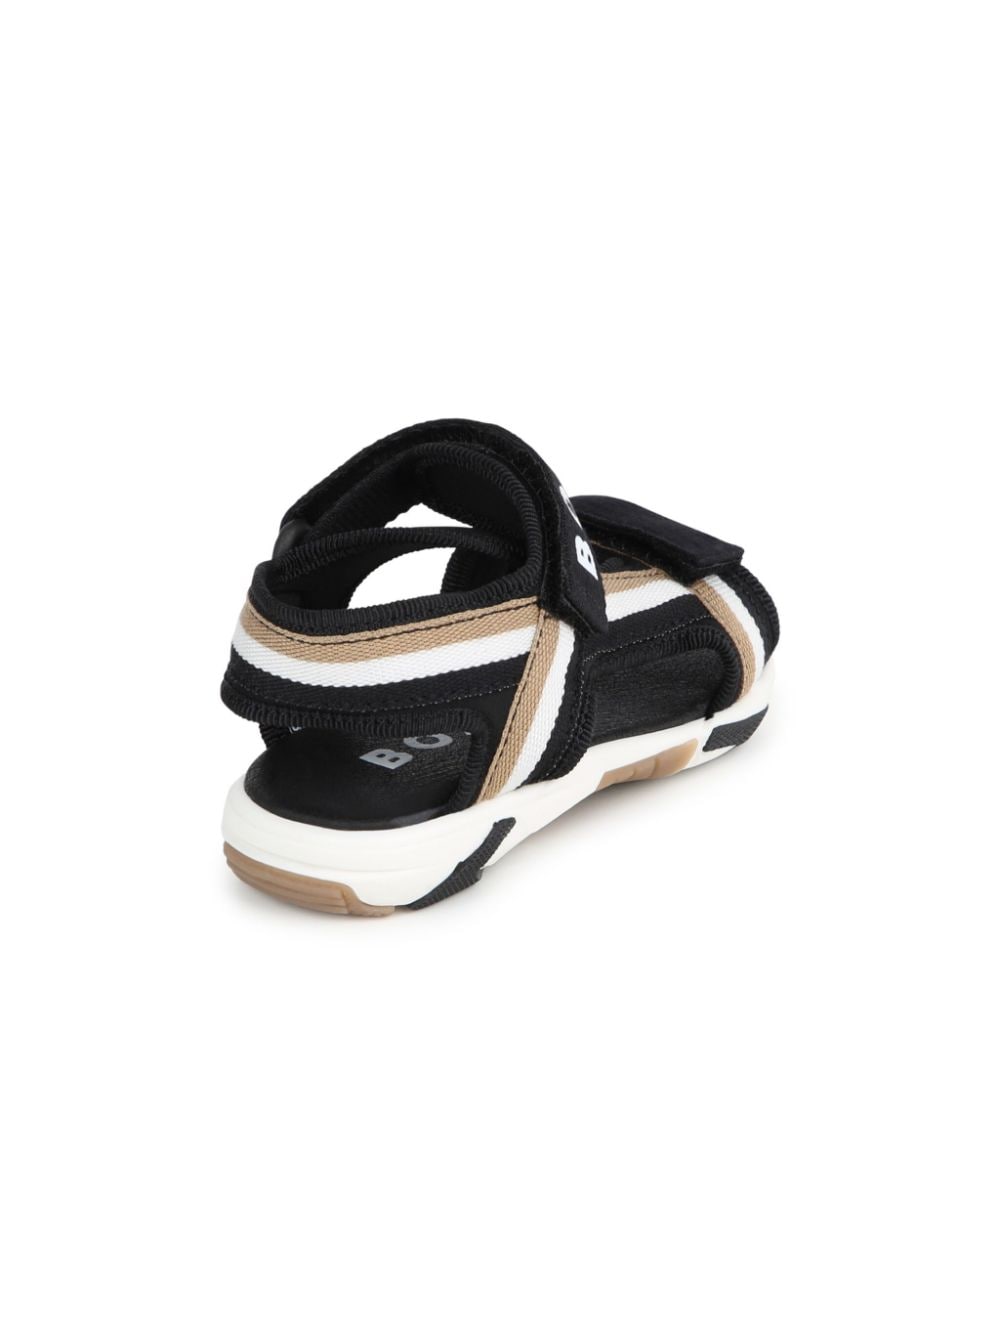 Black sandals for boys with logo